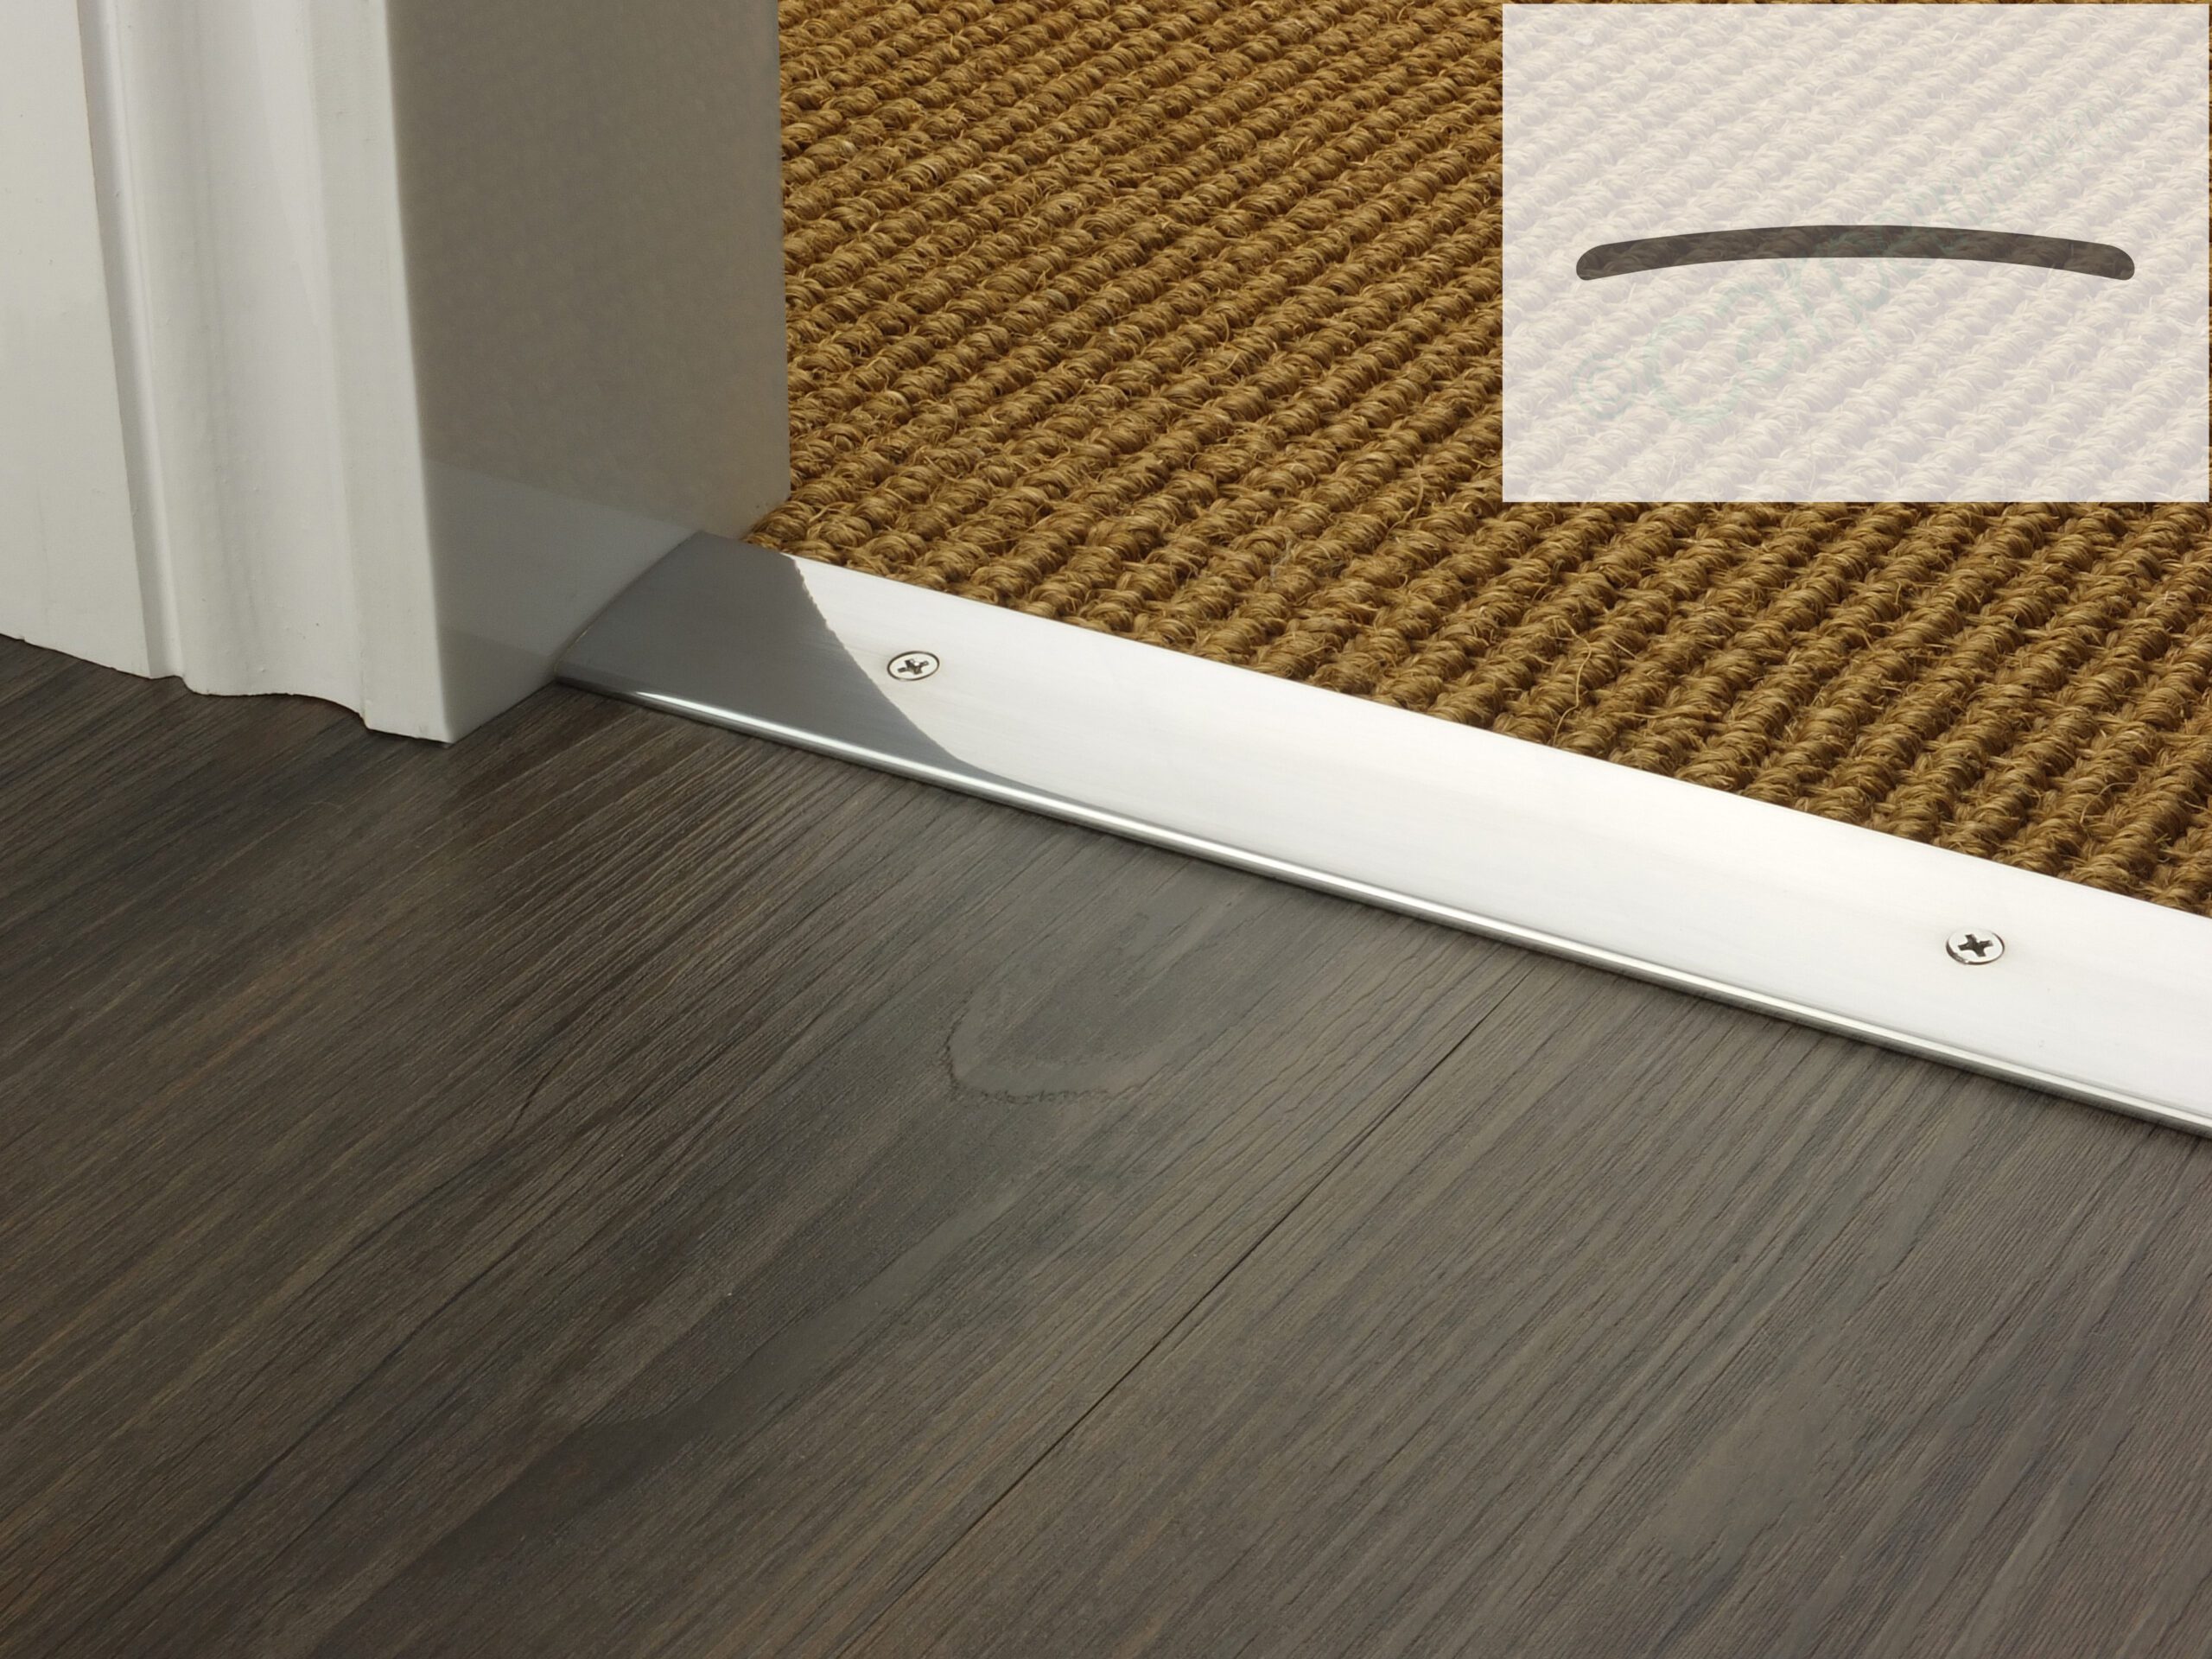 Carpet transition plate brushed chrome with profile diagram